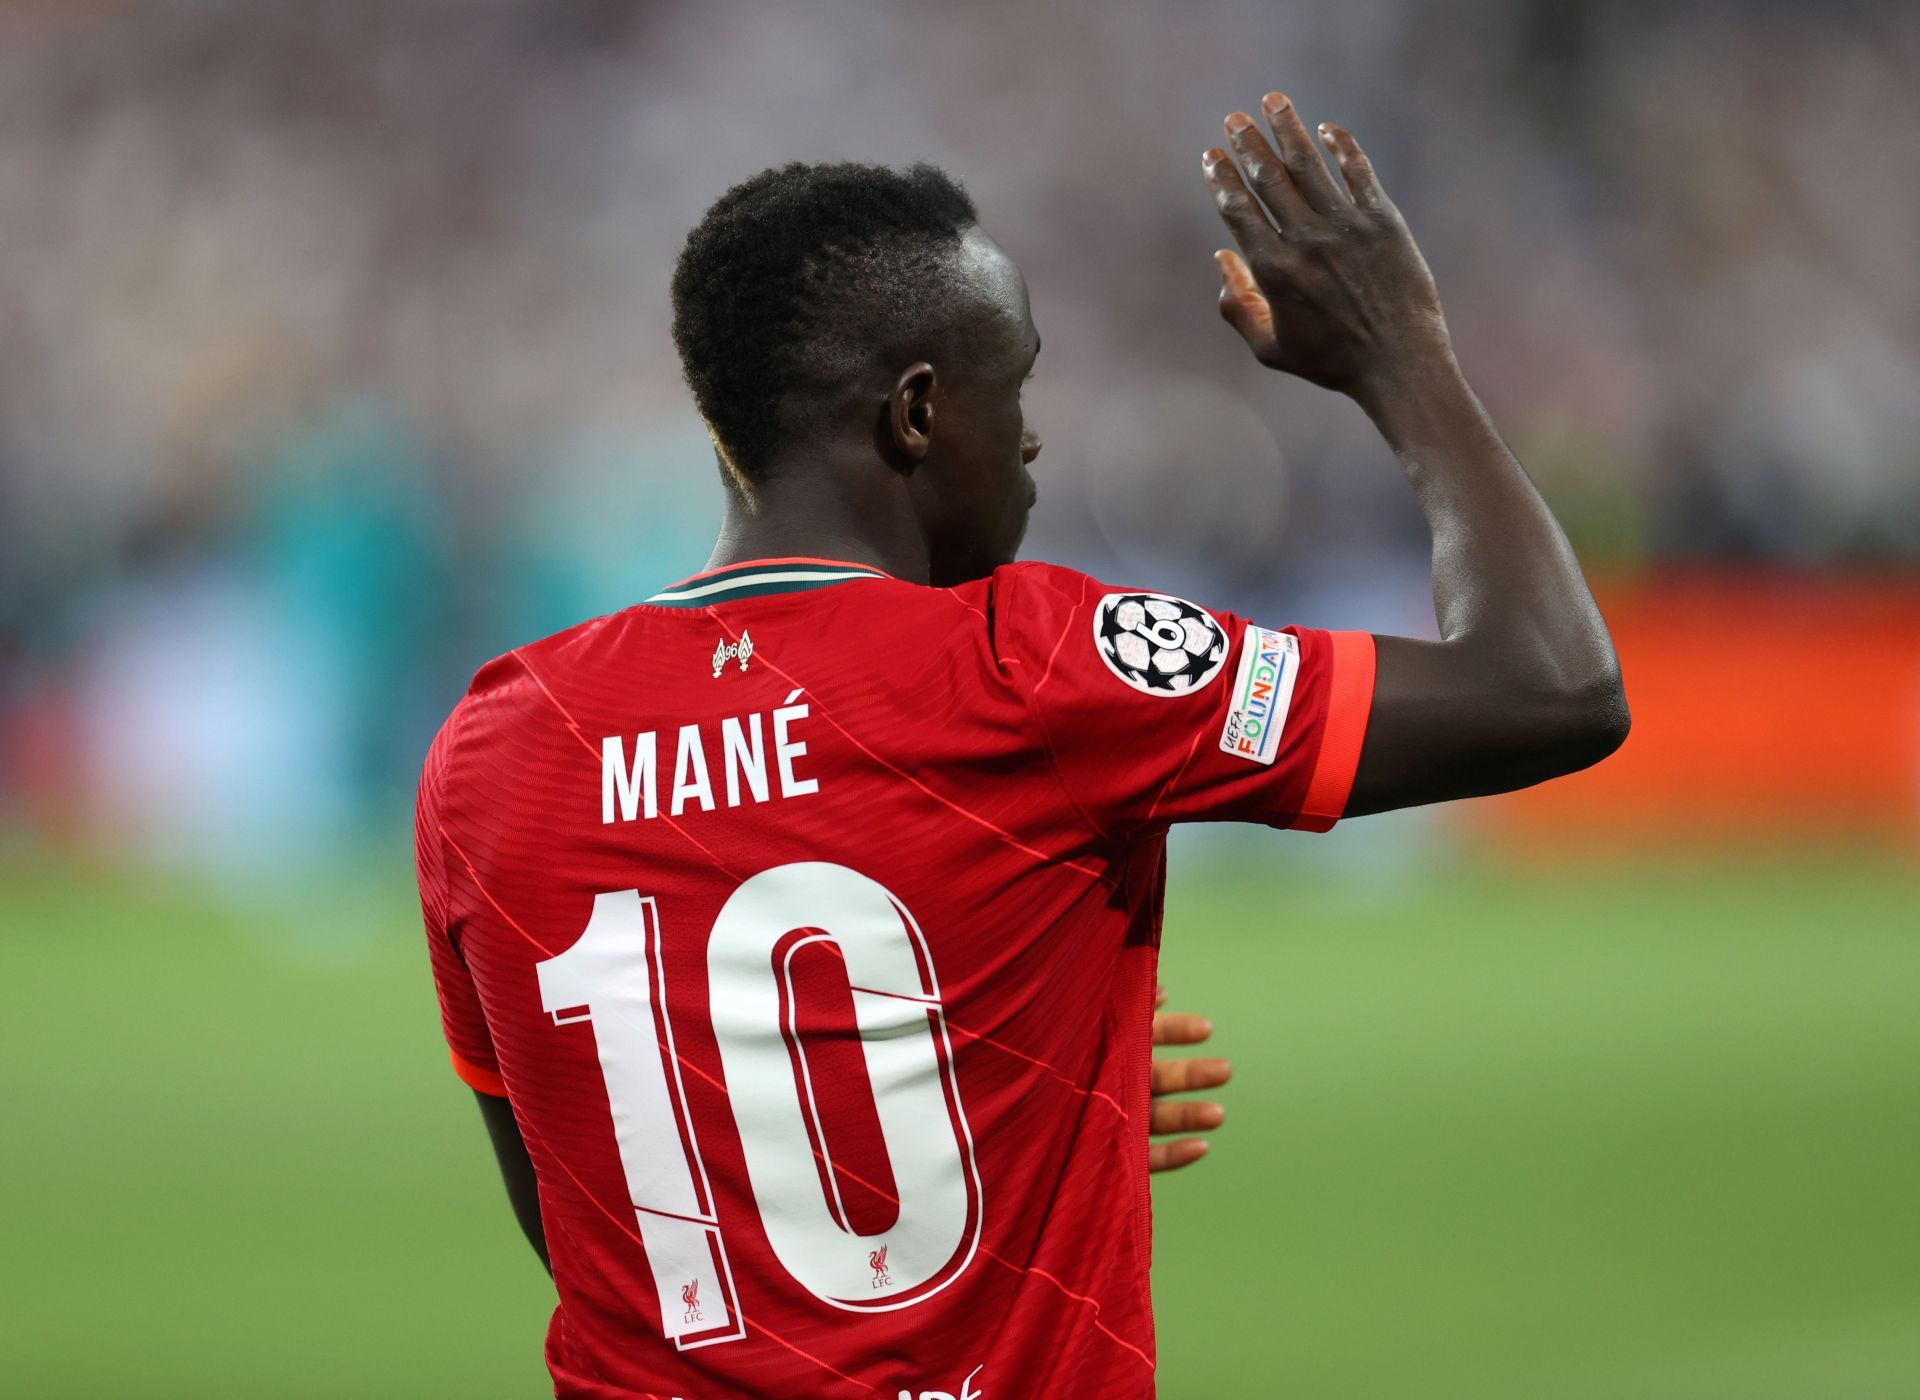 Sadio Mane looks likely to be waving goodbye to the Reds.